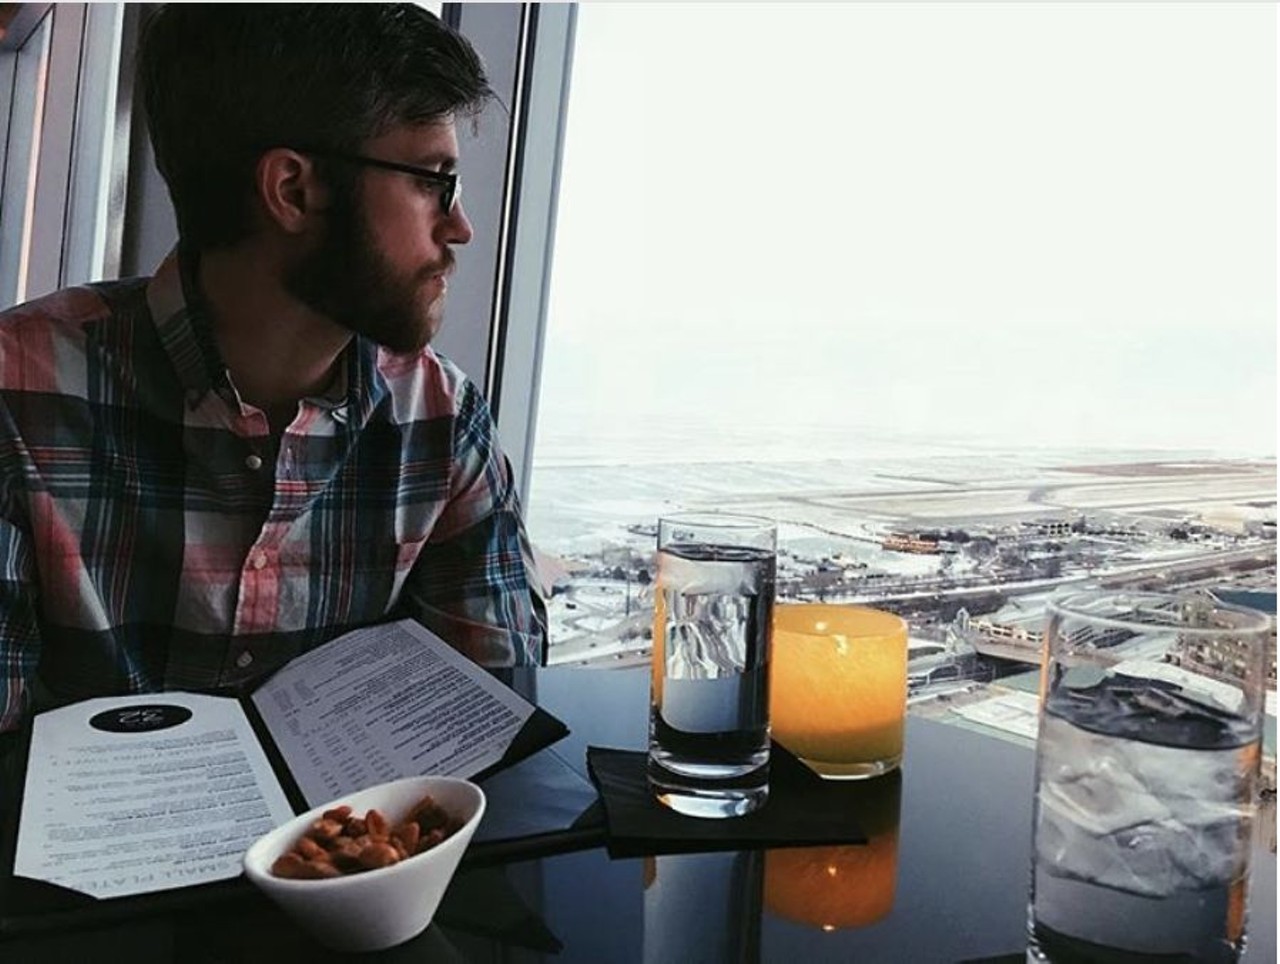 Bar 32
100 Lakeside Avenue E., Cleveland 
Located on the 32nd floor of the downtown Hilton, Bar 32 allows guests to lounge high above the Cleveland skyline.
Photo via samwantack6/Instagram